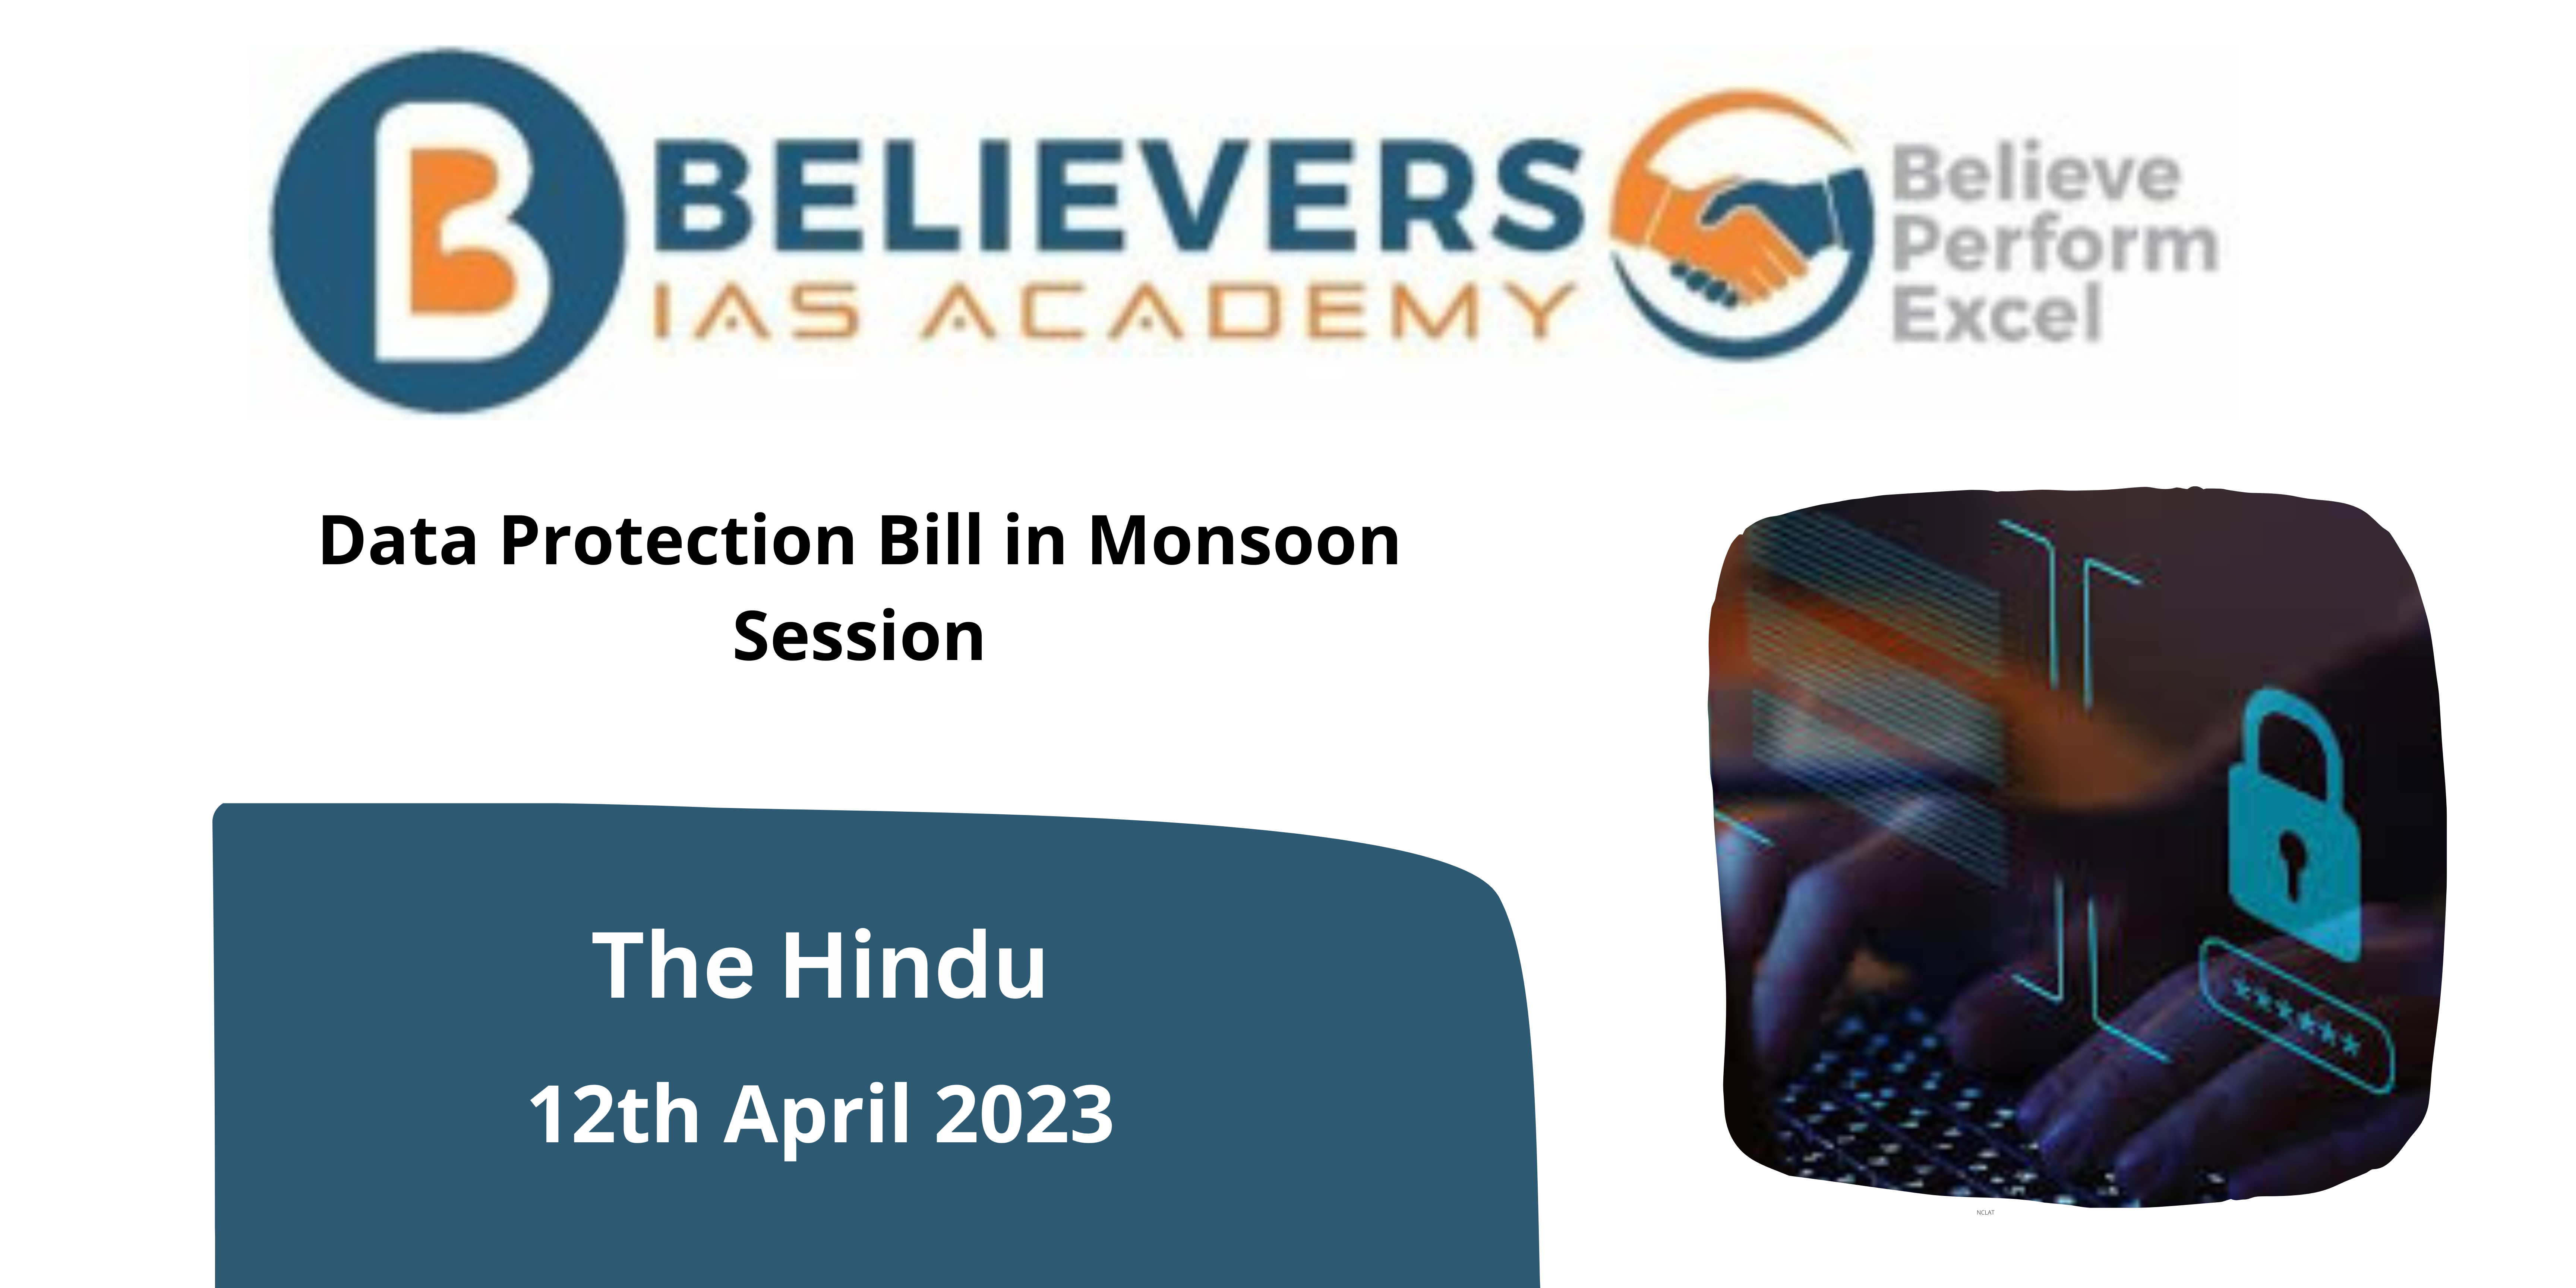 Data Protection Bill in Monsoon Session